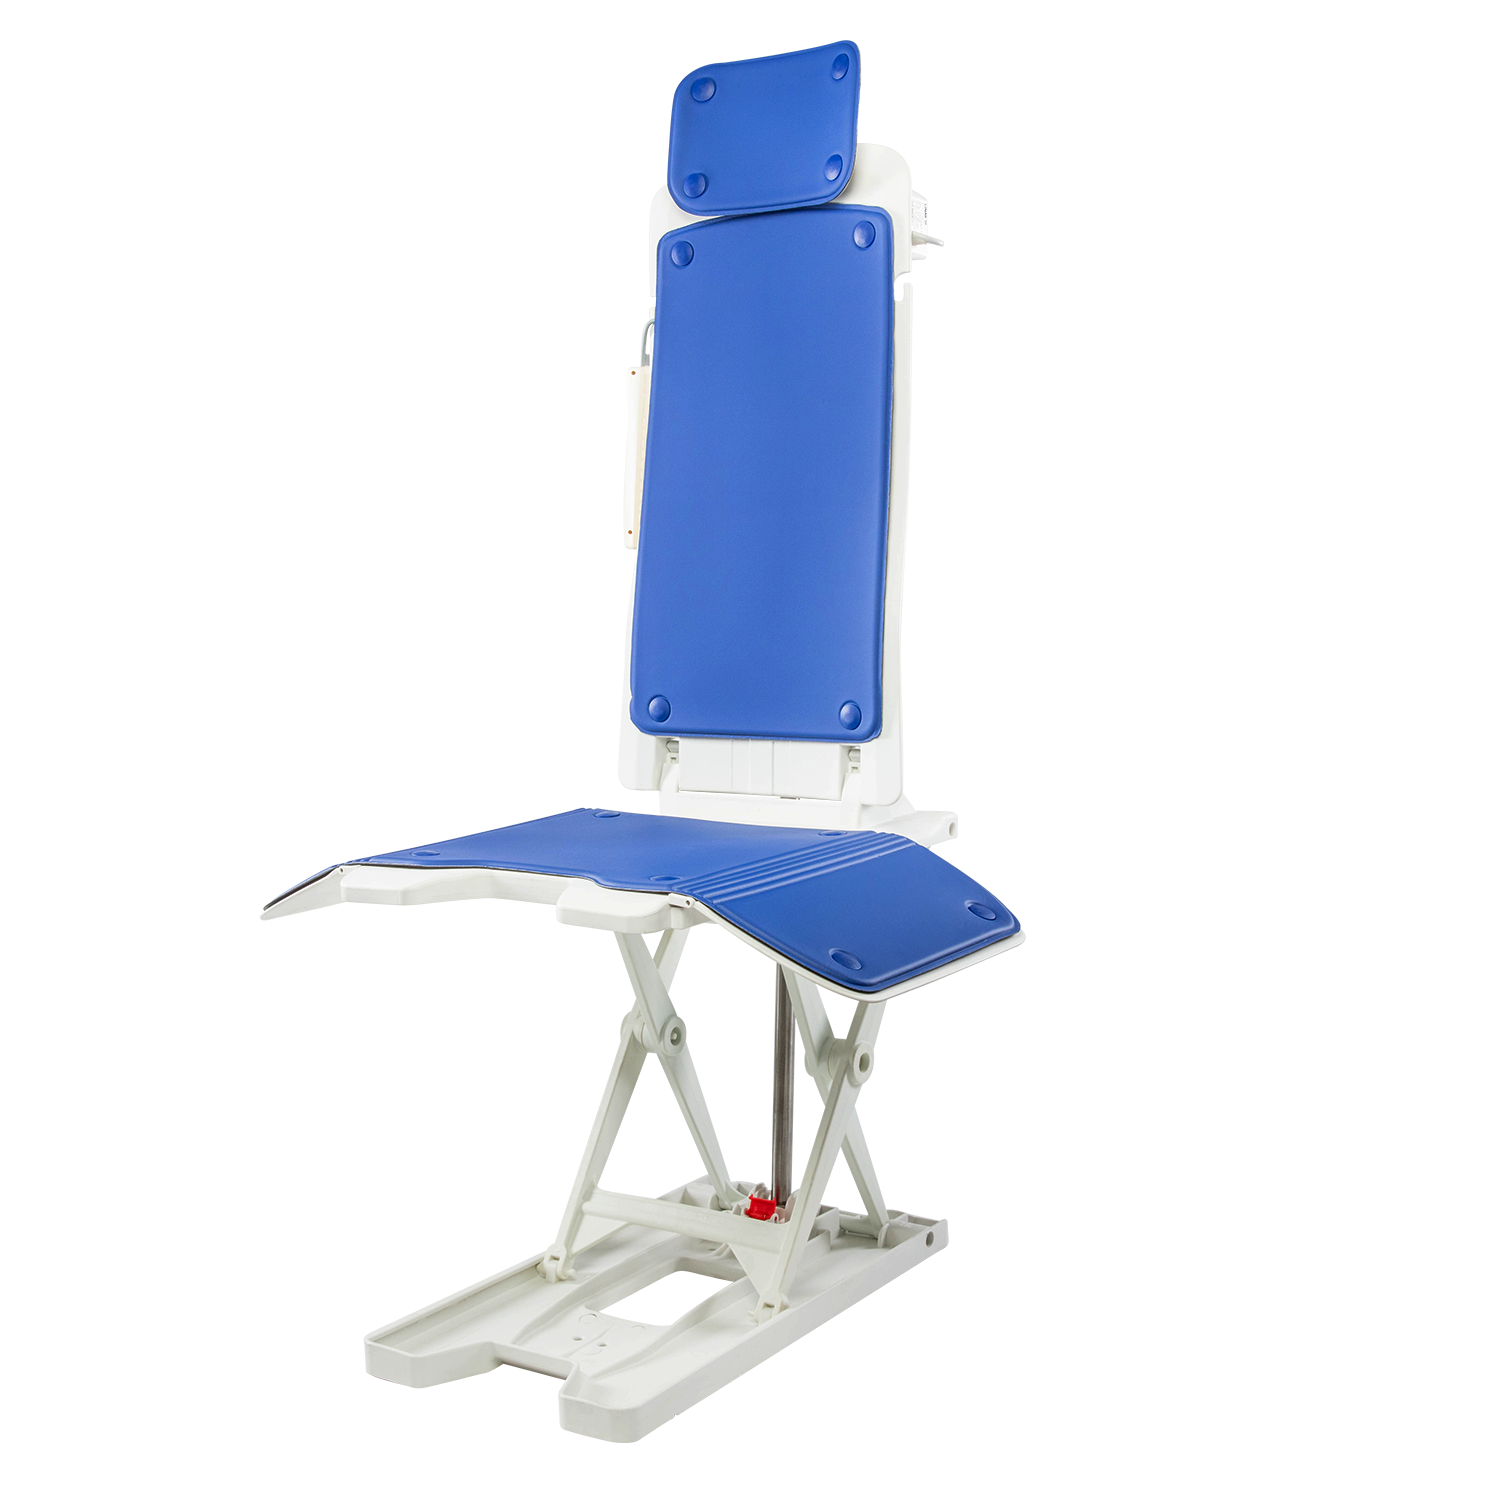 Easylift Portable Lifting Seat - Complete Care Shop